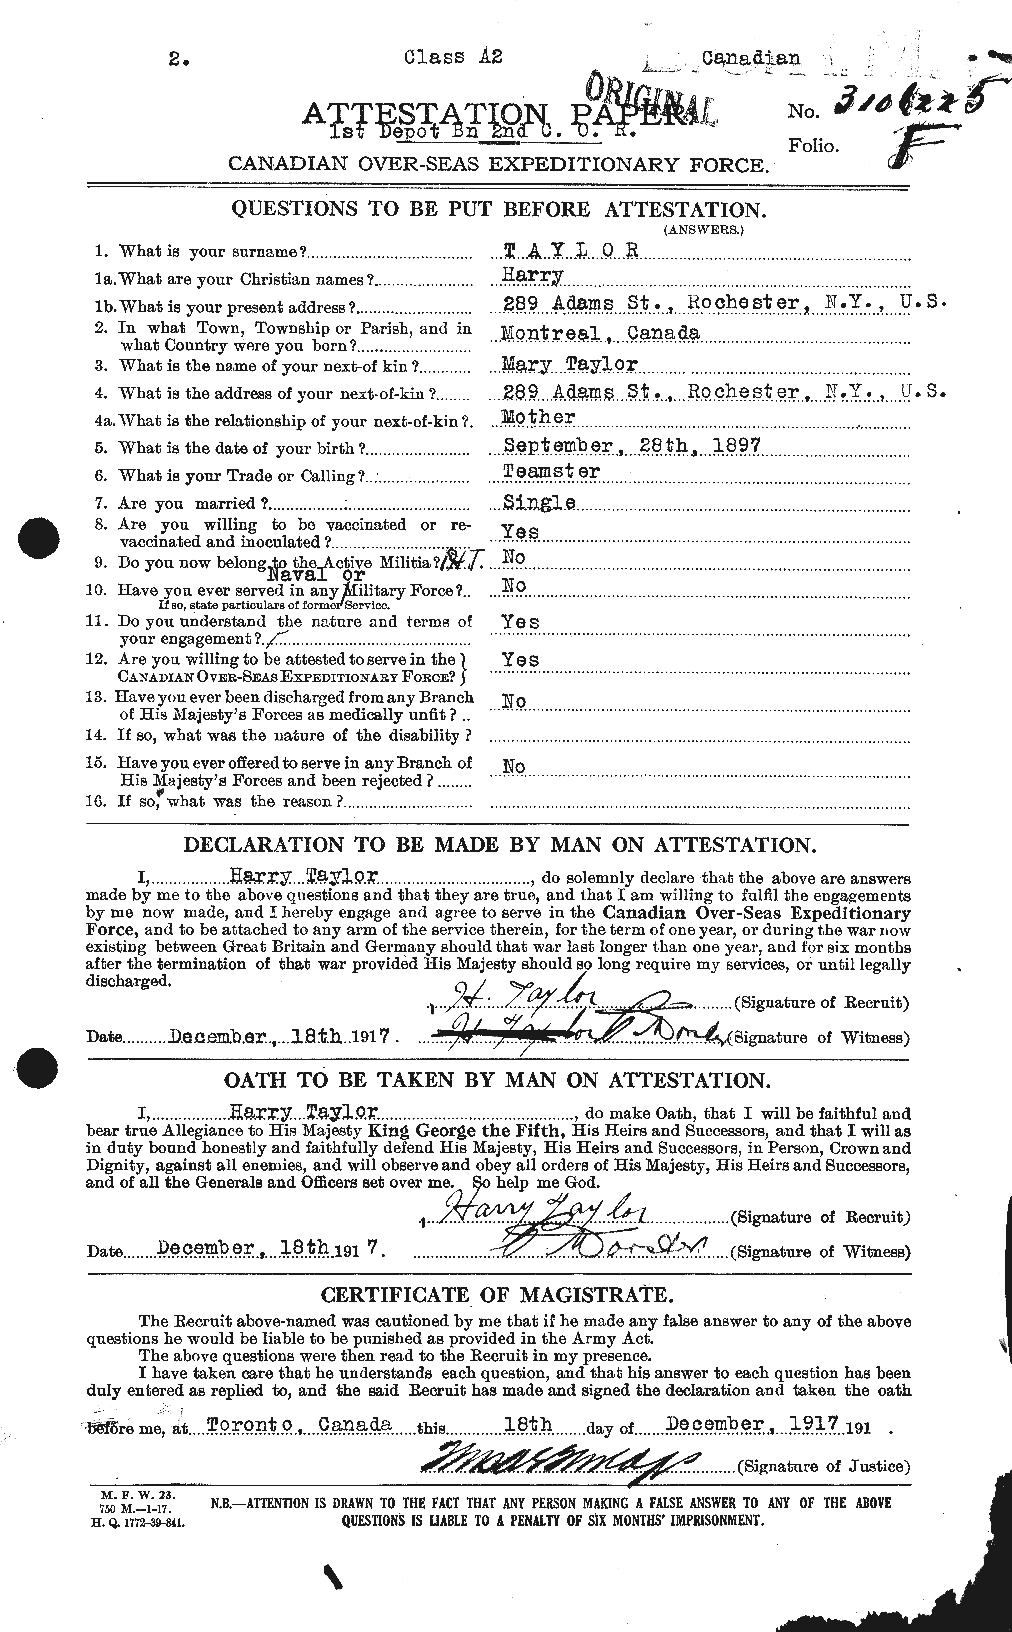 Personnel Records of the First World War - CEF 626473a